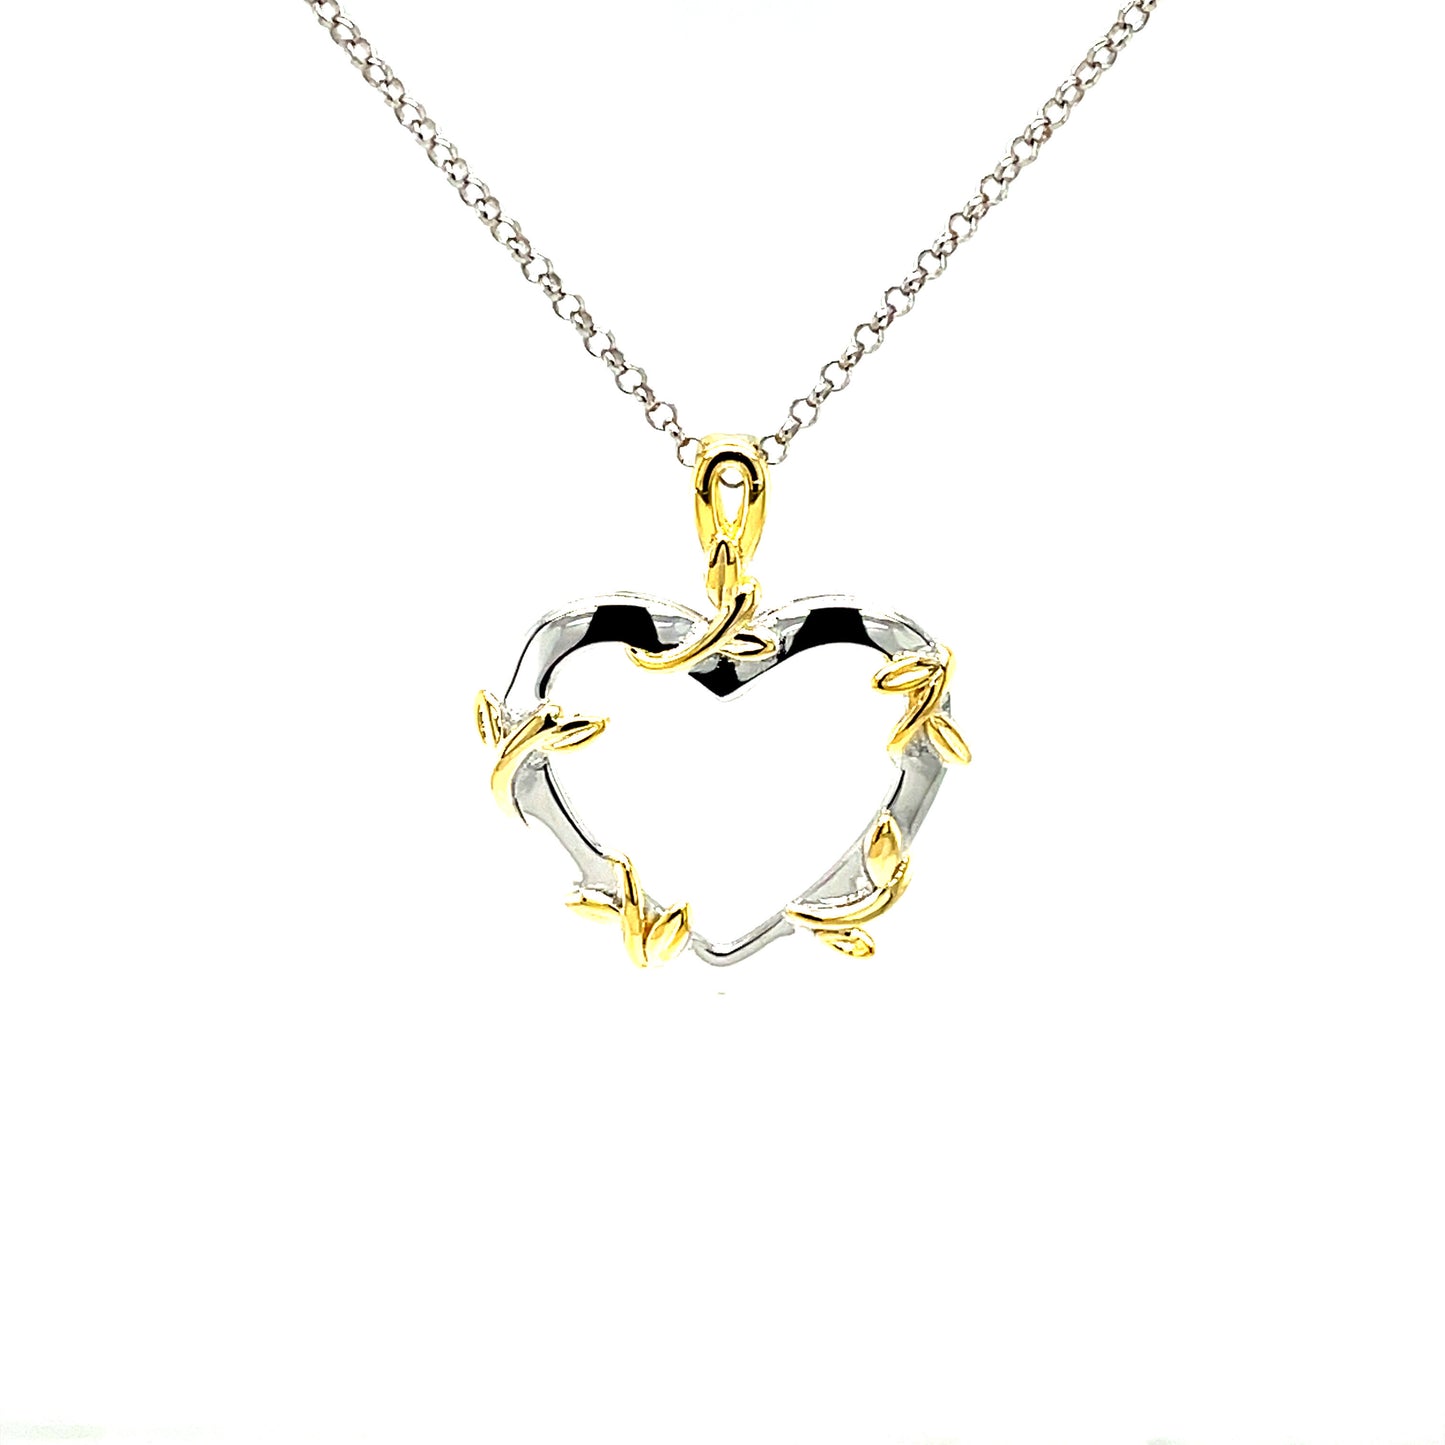 PML Gold Accented, Sterling Silver, Heart Pendant w/SS Chain.